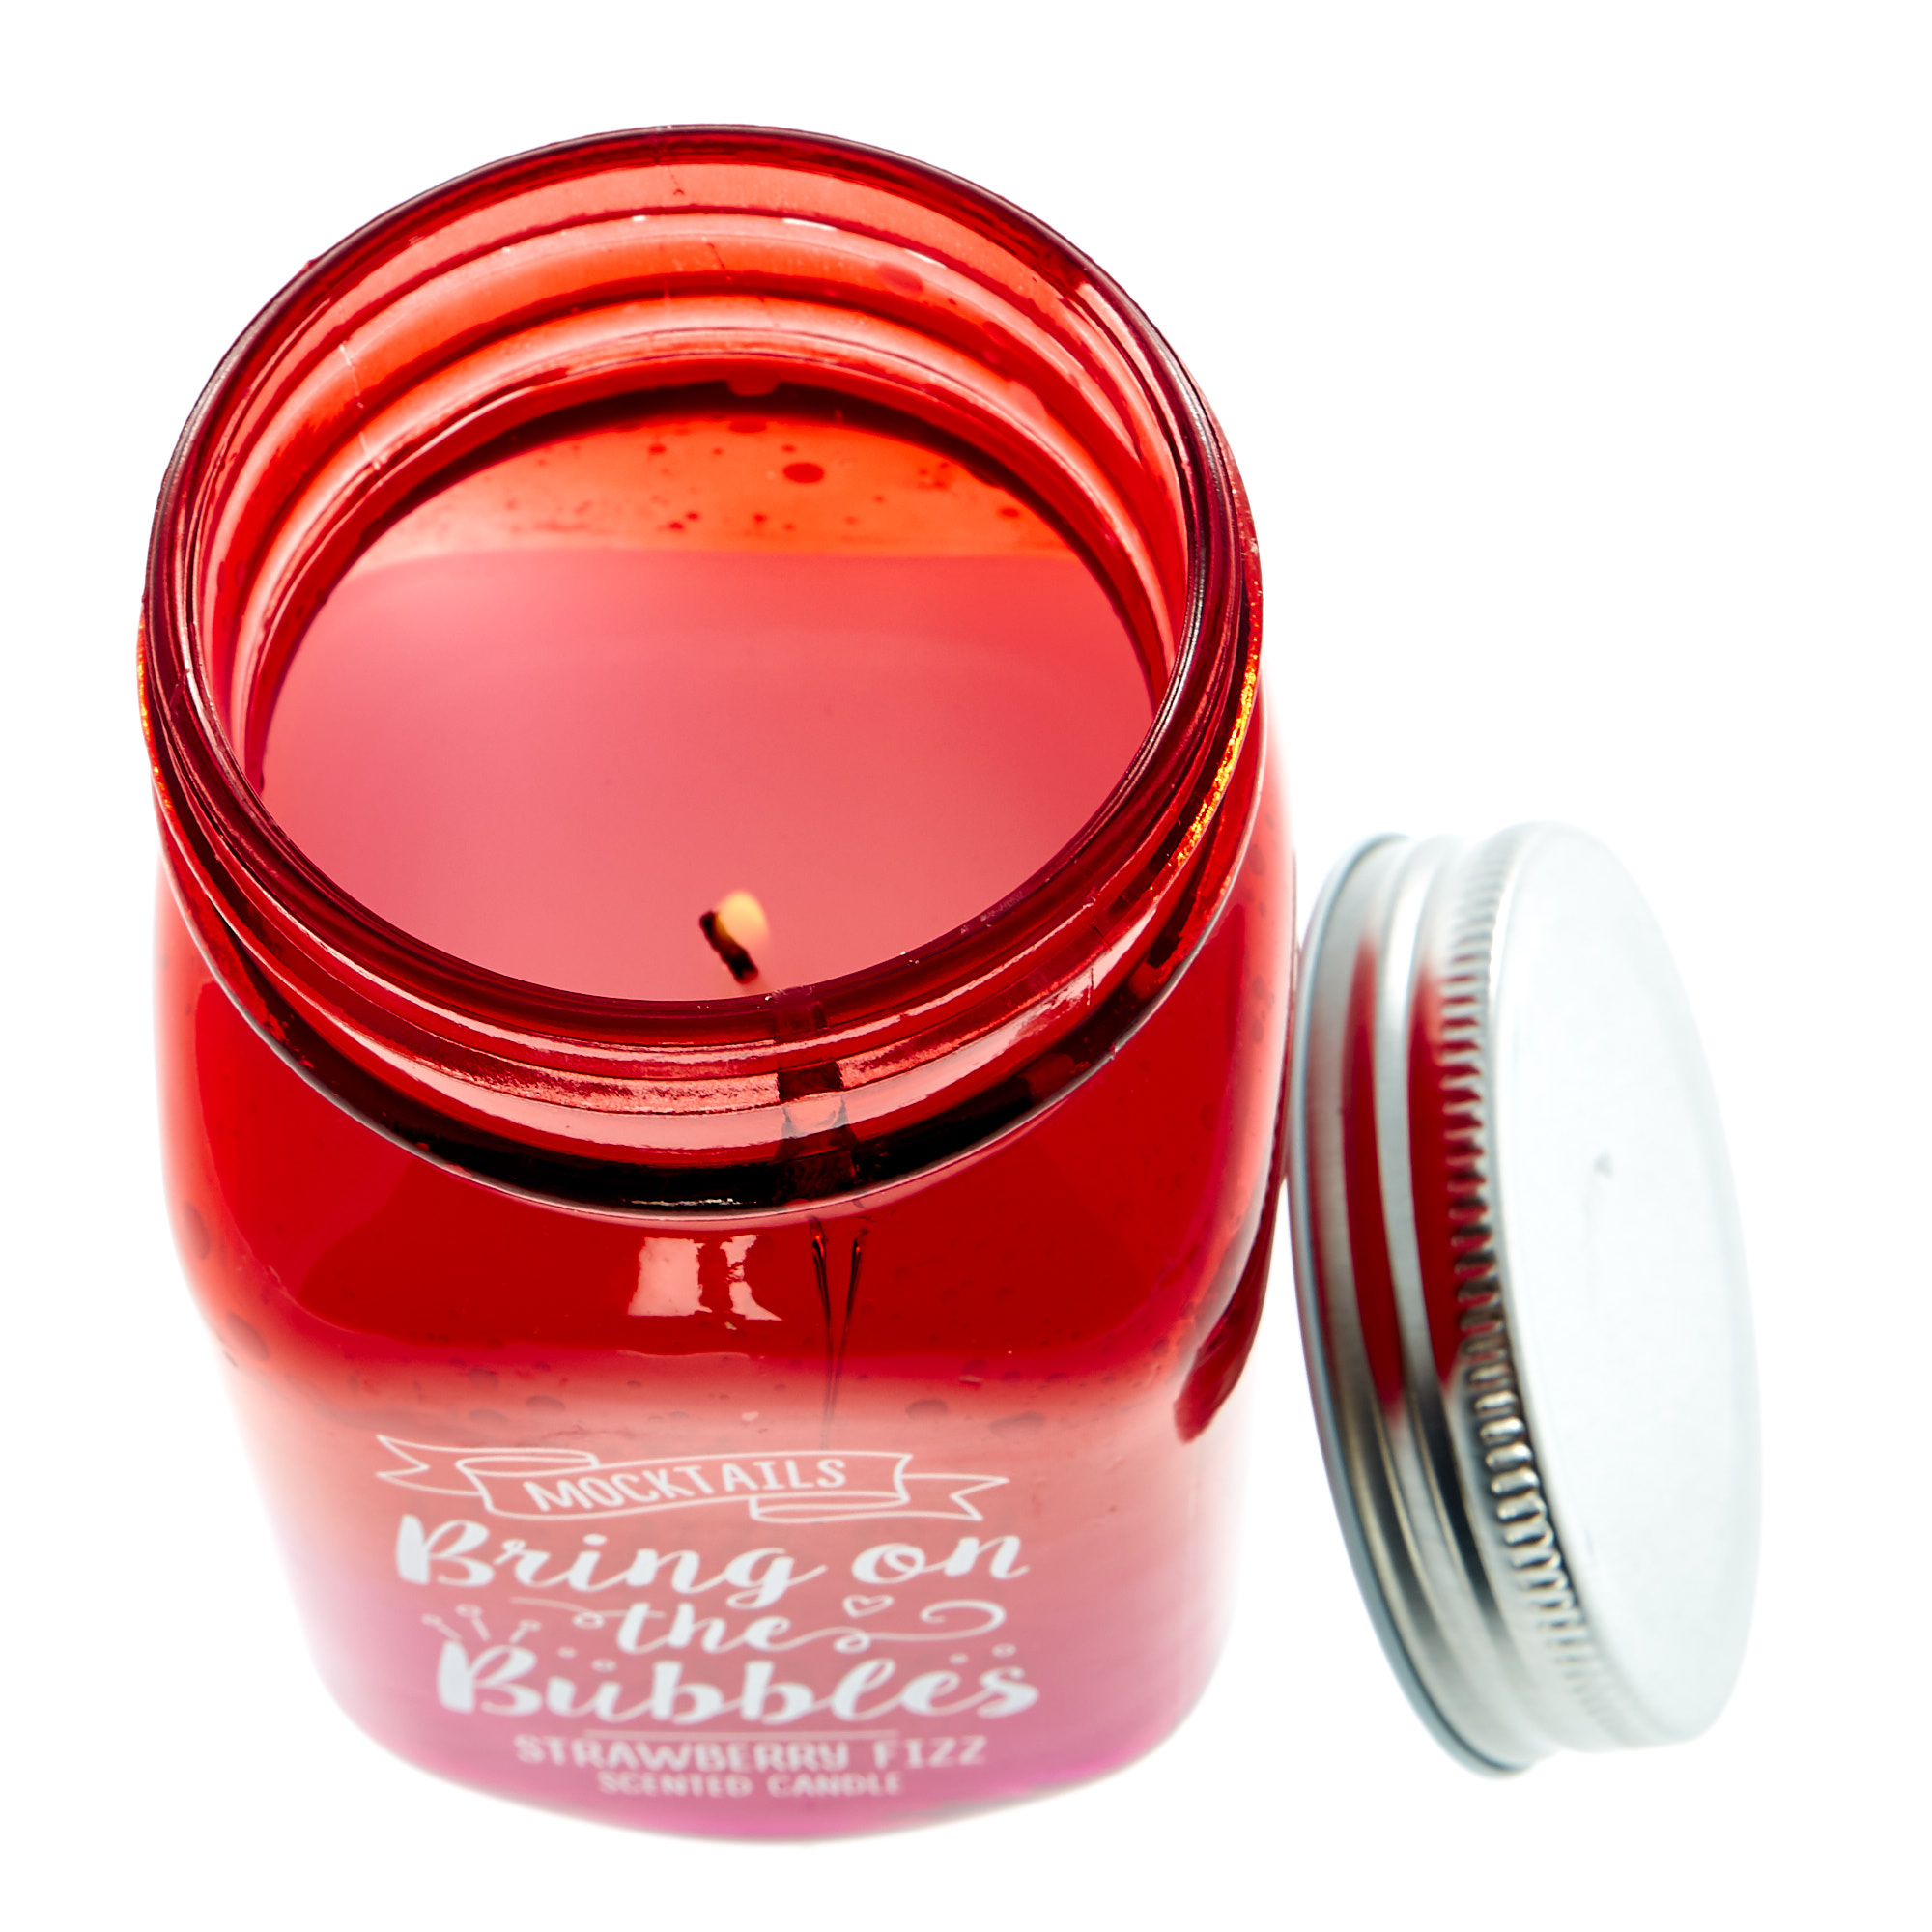 Mocktails Strawberry Fizz Scented Candle 